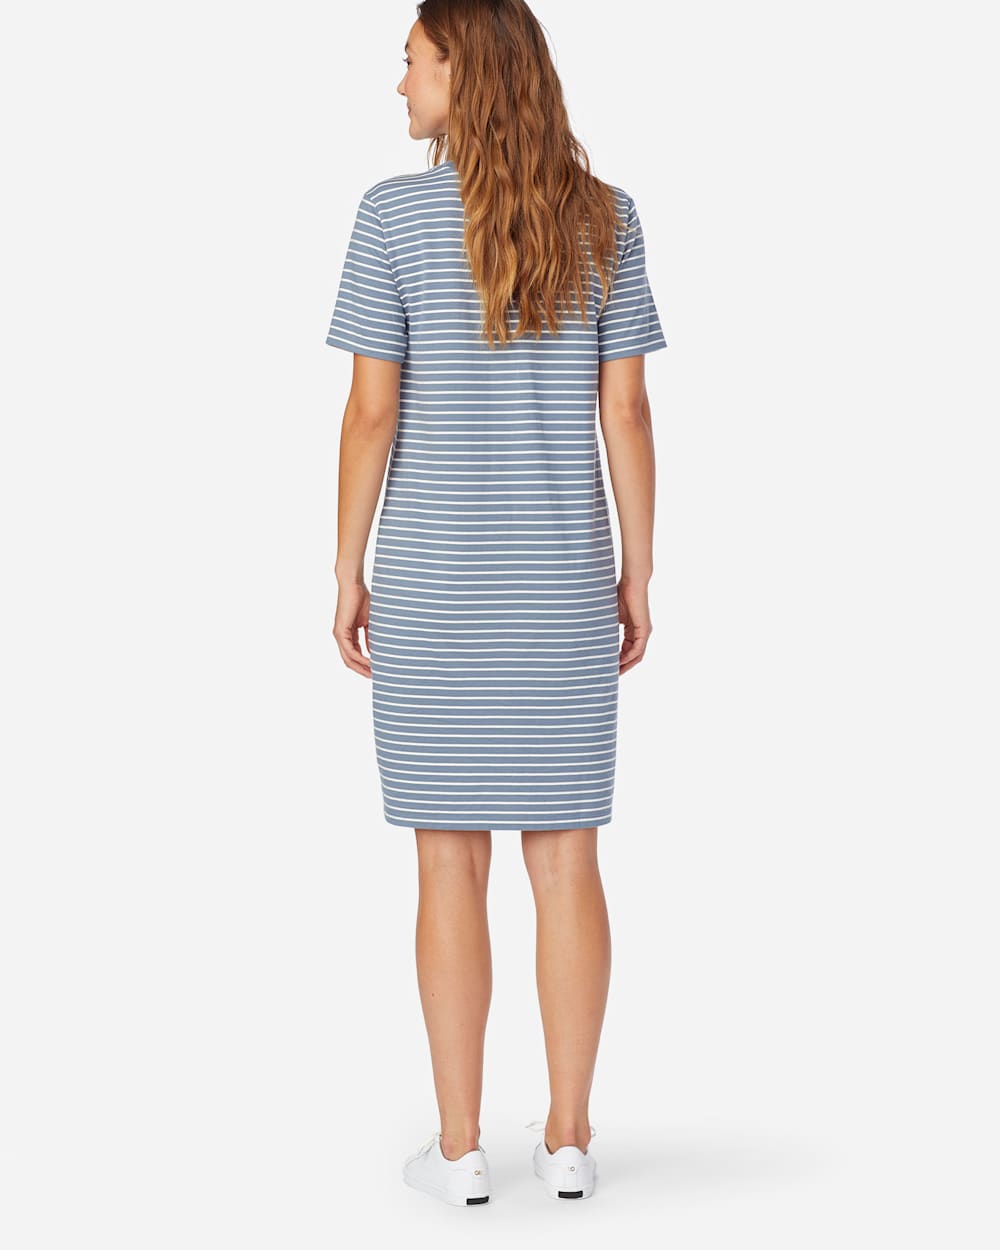 ALTERNATE VIEW OF DESCHUTES STRIPE TEE DRESS IN FADED BLUE/ANTIQUE WHITE image number 3